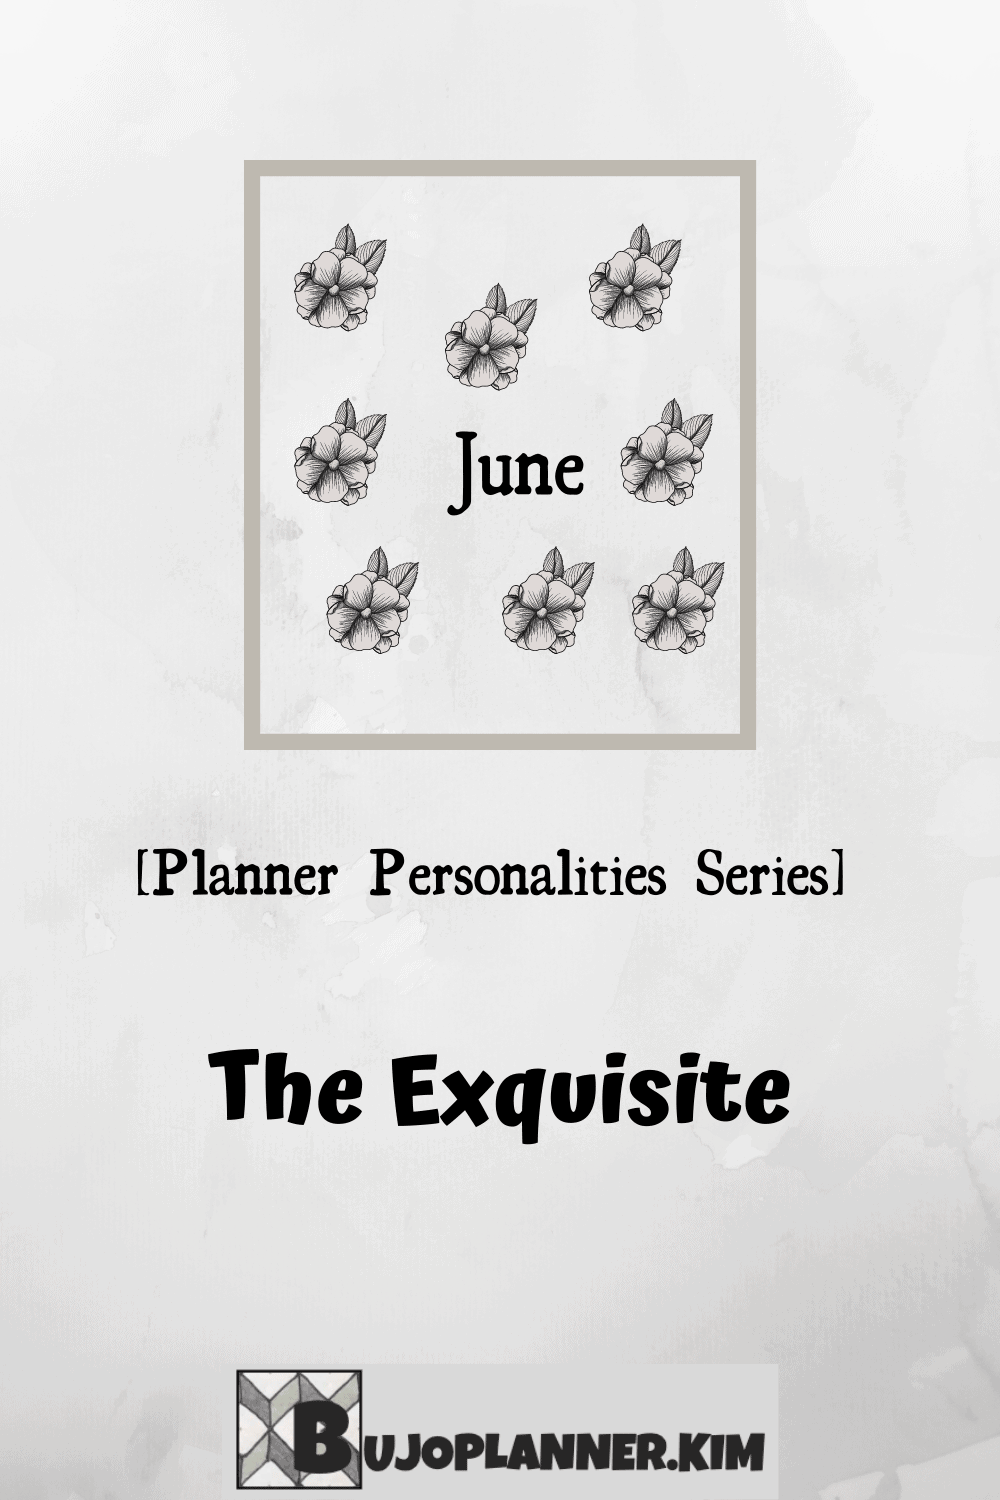 Picture of a Heading 'June' along with some decorated flowers. The title of the picture reads 'Planner Personalities Series 'The Exquisite''.